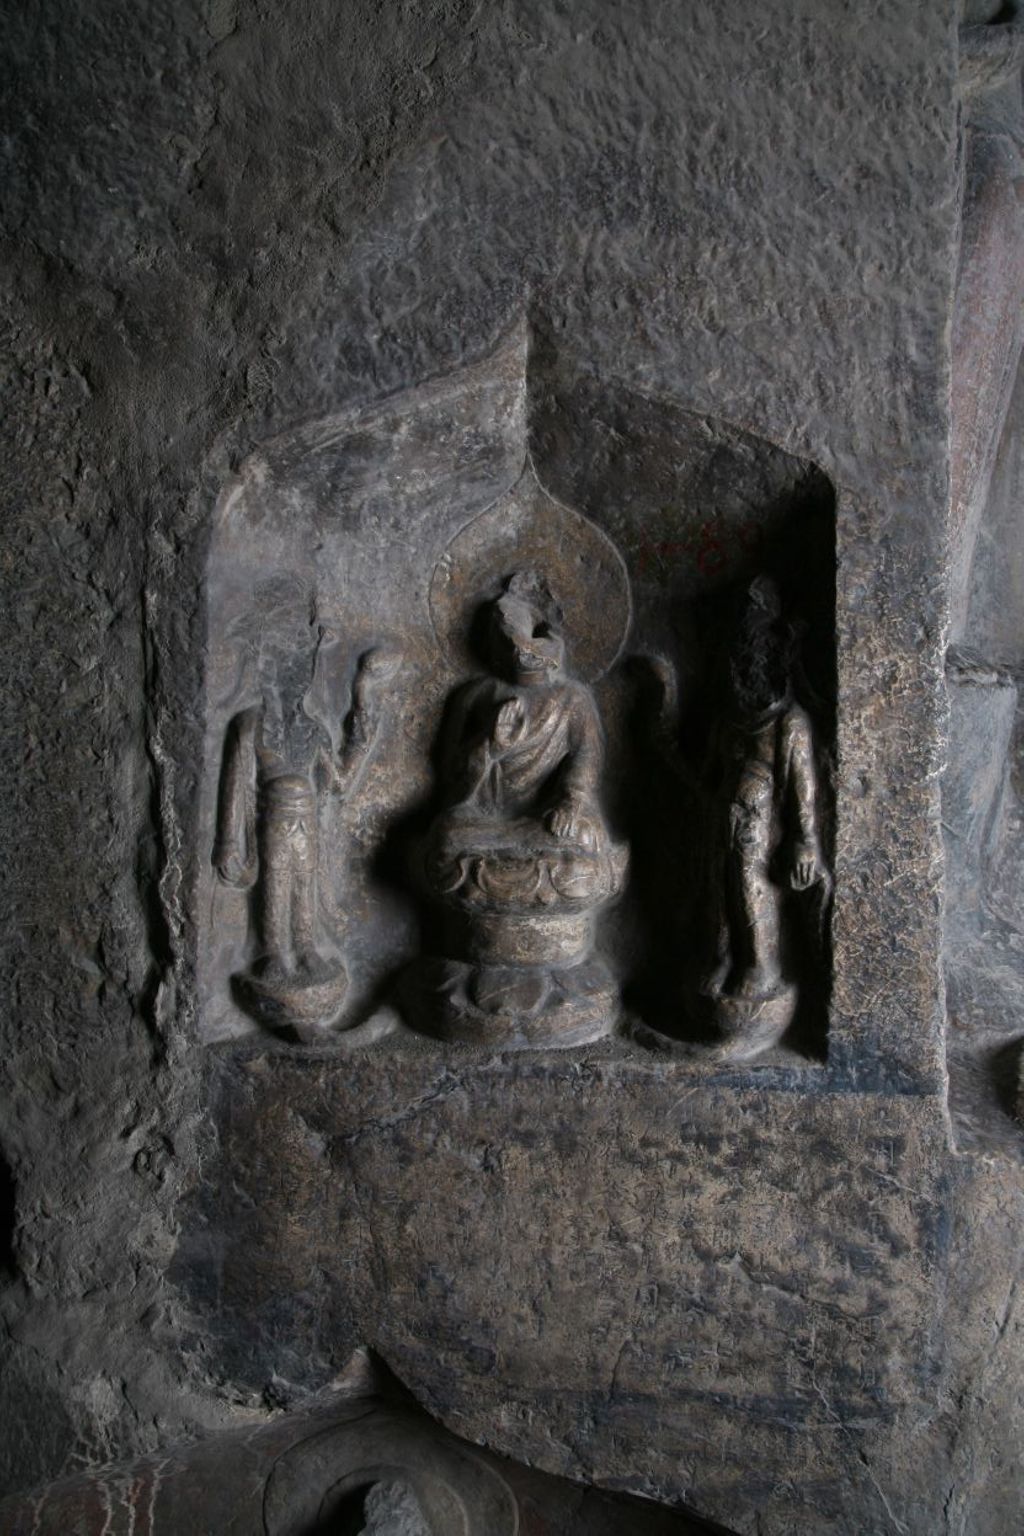 Miniature of Southern Xiangtangshan, Cave 1, altar right